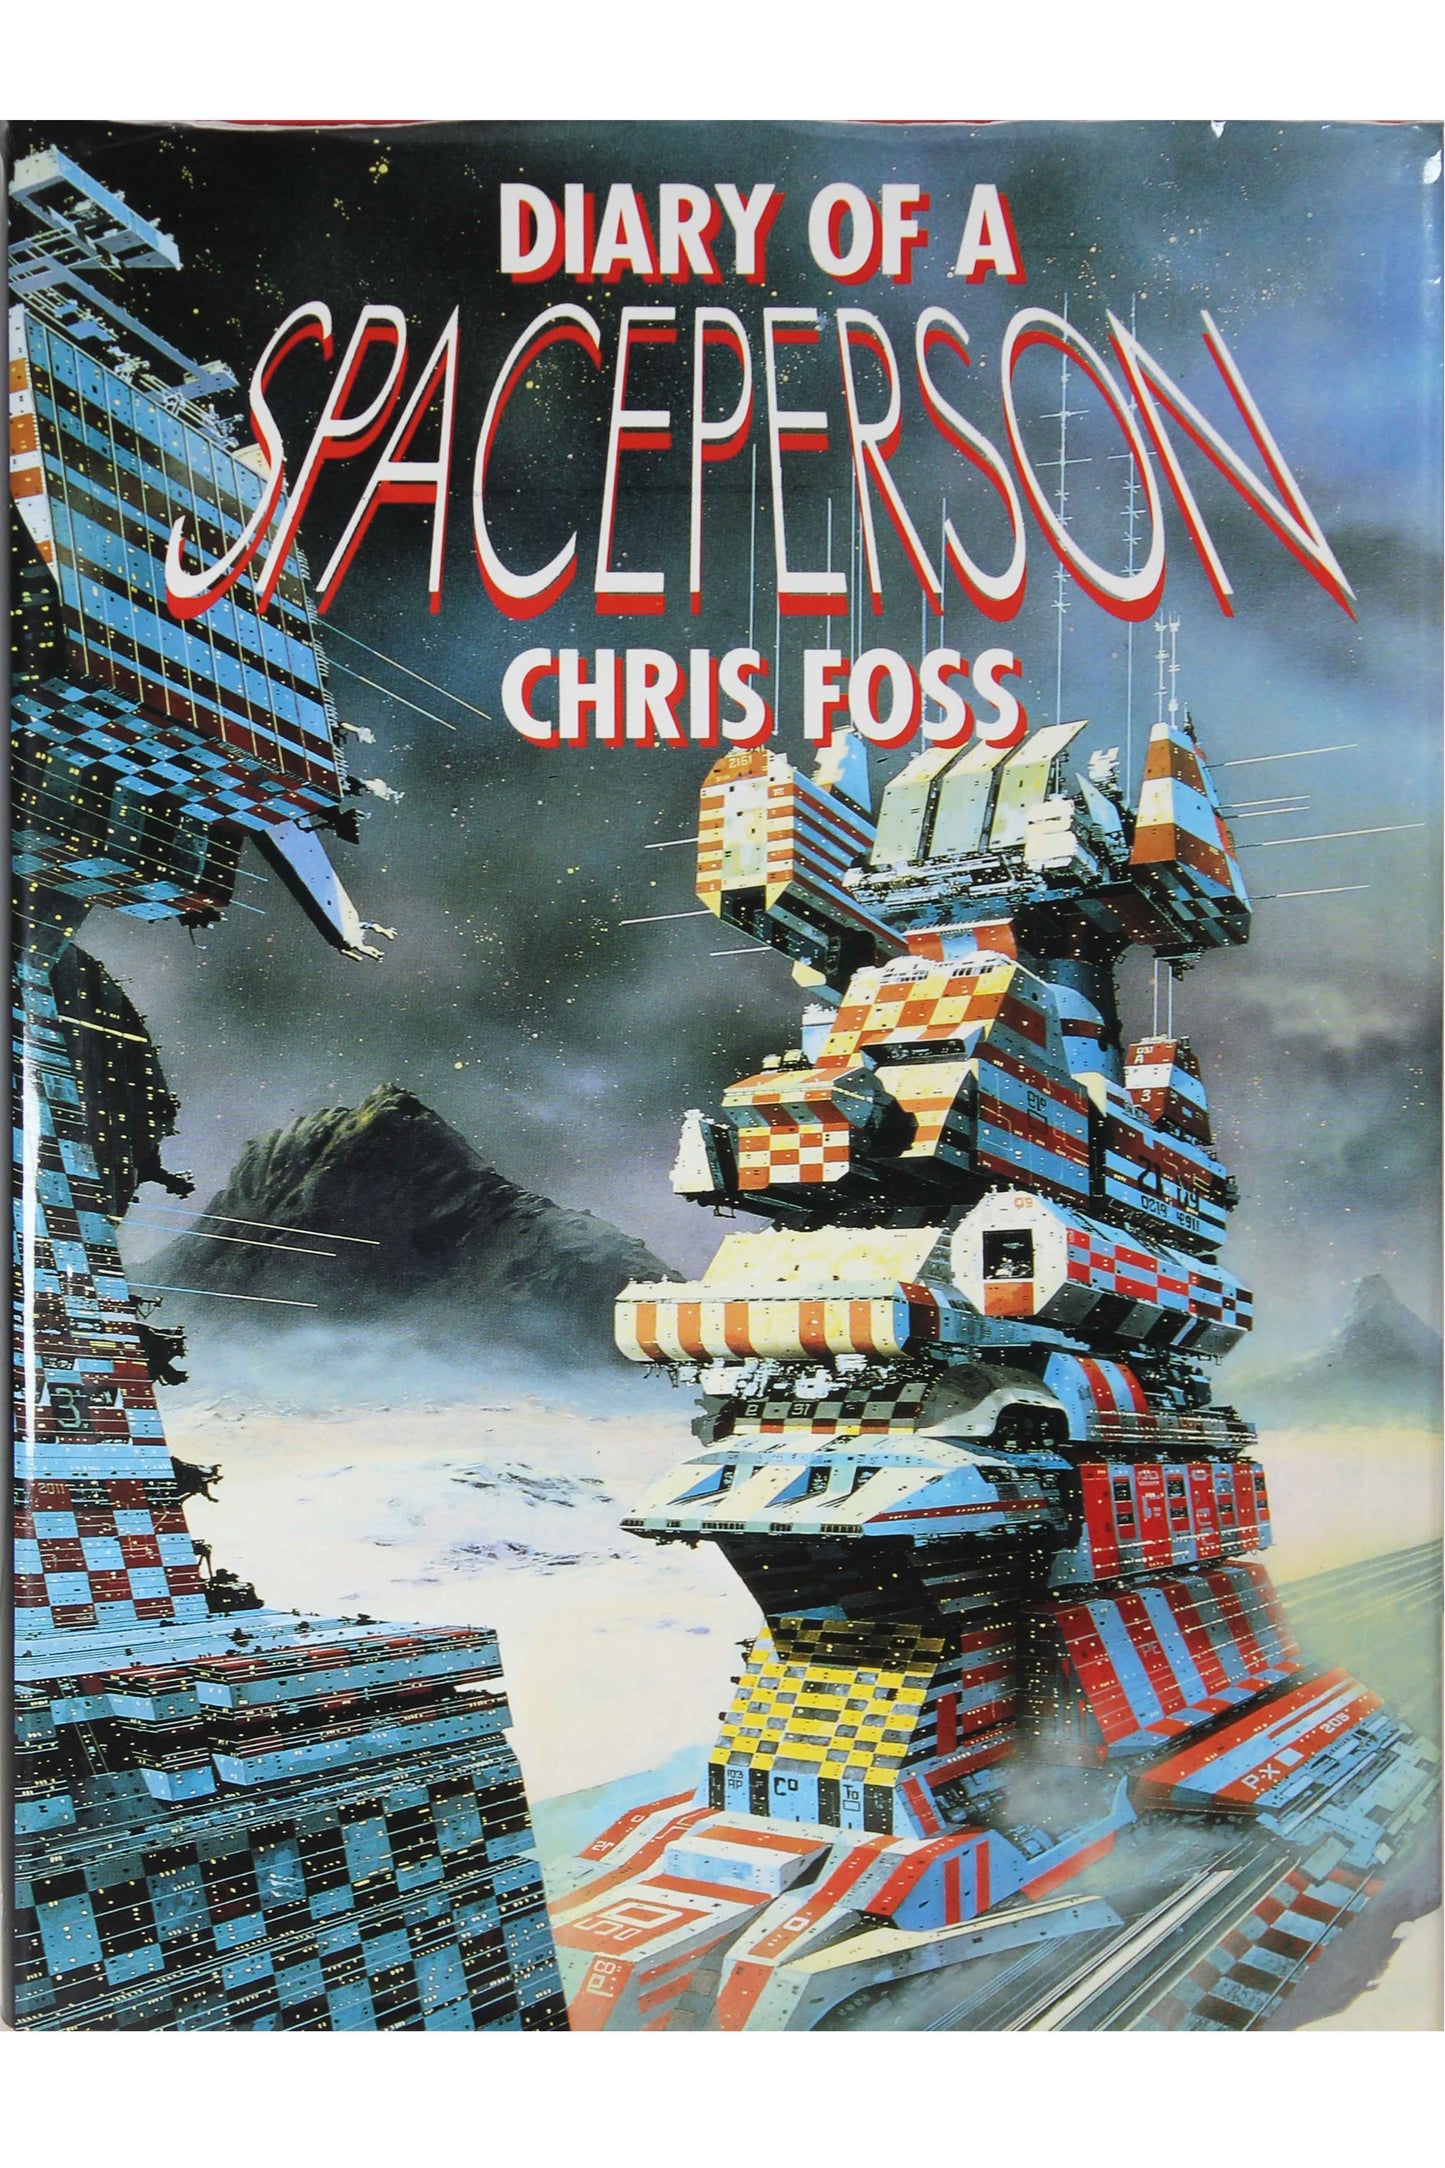 Chris Foos - Diary of a Spaceperson